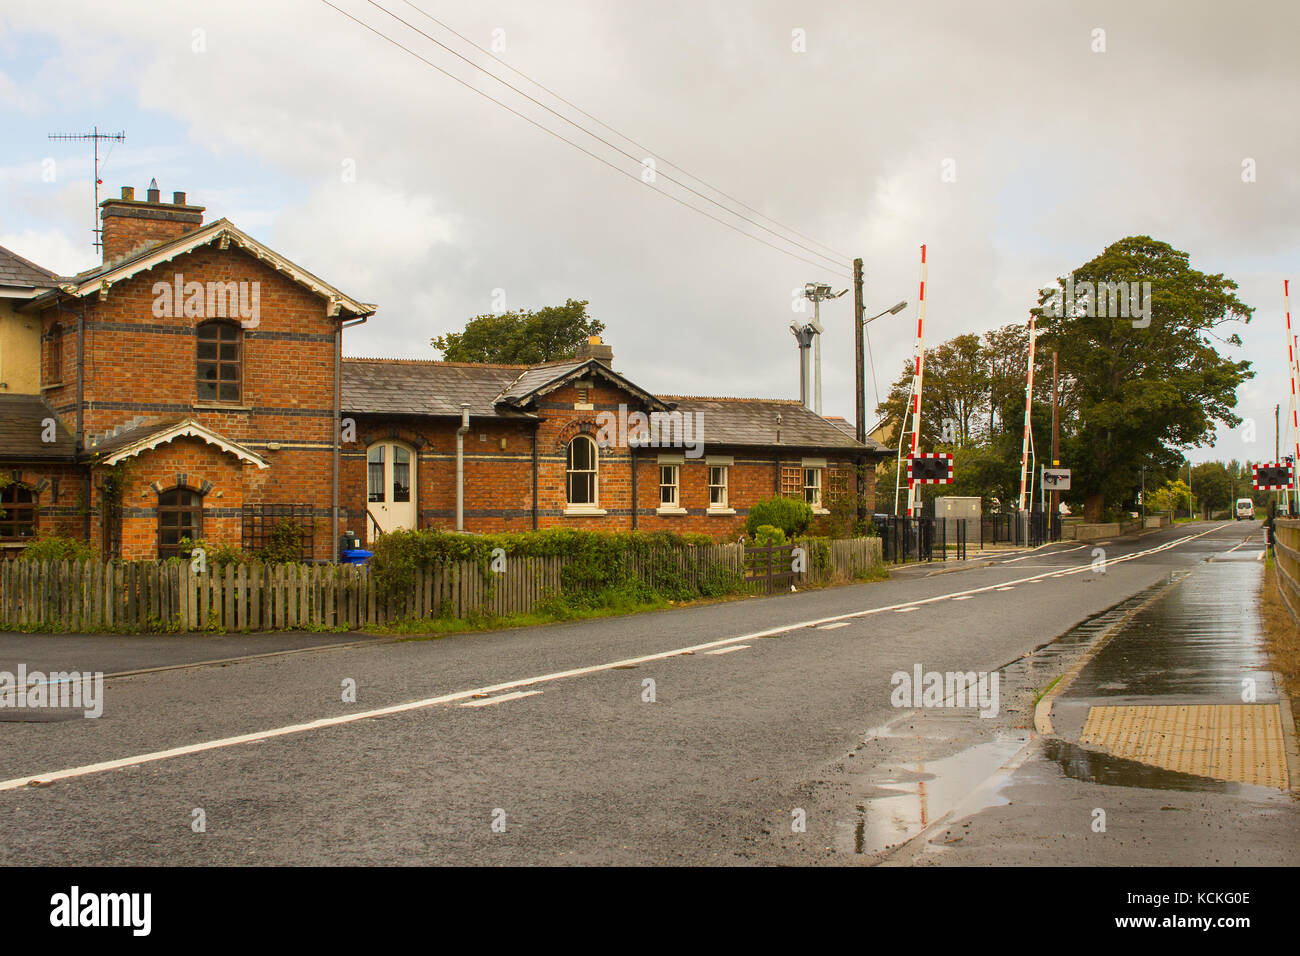 The refurbished station and automatic rail crossing at the town land of bellerena on the North coast of Ireland in County Londonderry on a dull day Stock Photo